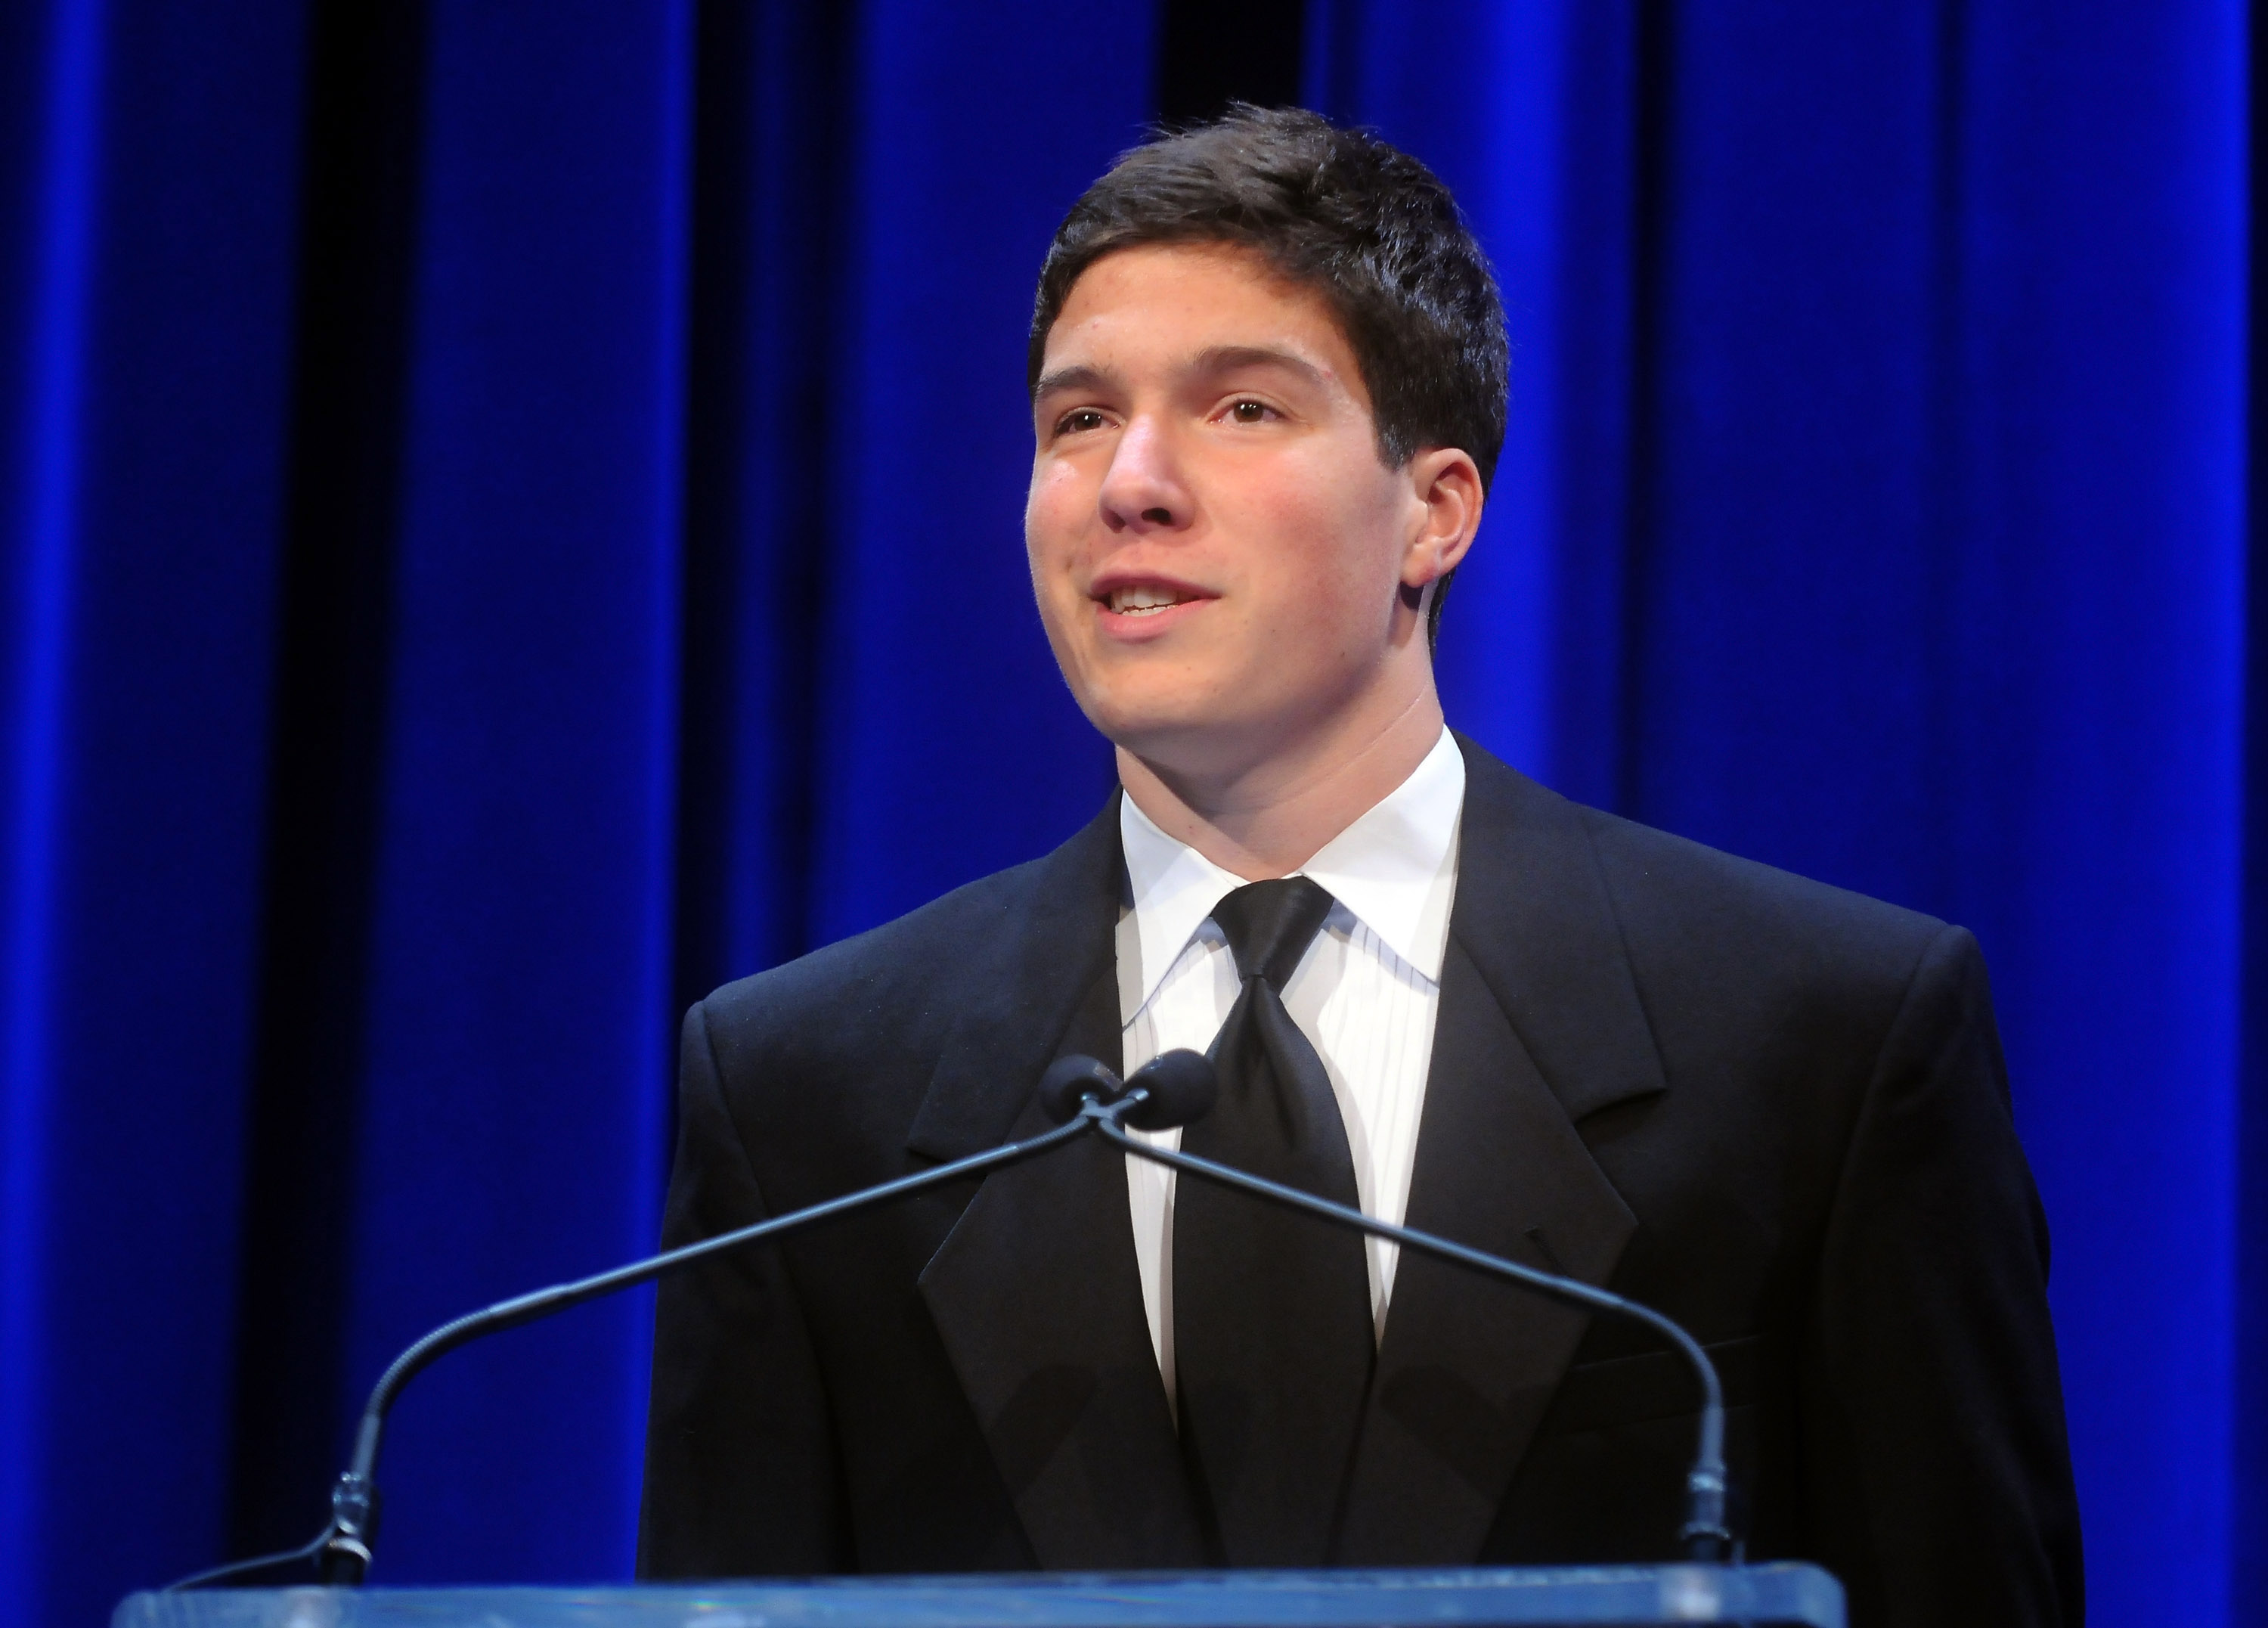 The late actor's son speaks during the 18th Annual "A Magical Evening Gala" hosted by the Christopher & Dana Reeve Foundation on November 10, 2008, in New York City | Source: Getty Images